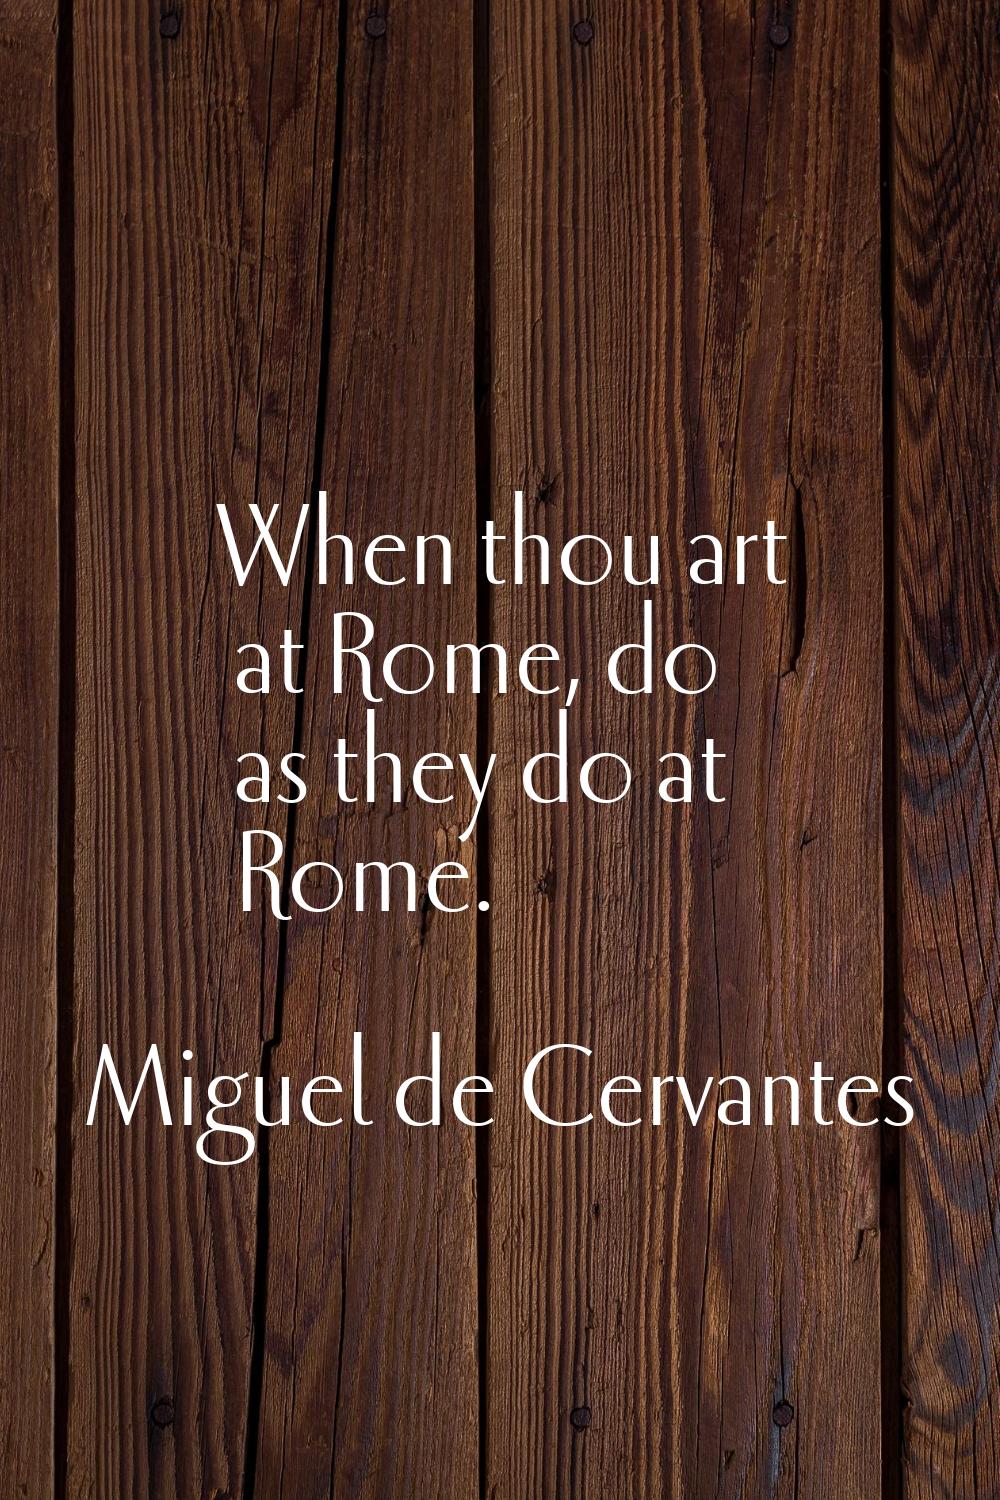 When thou art at Rome, do as they do at Rome.